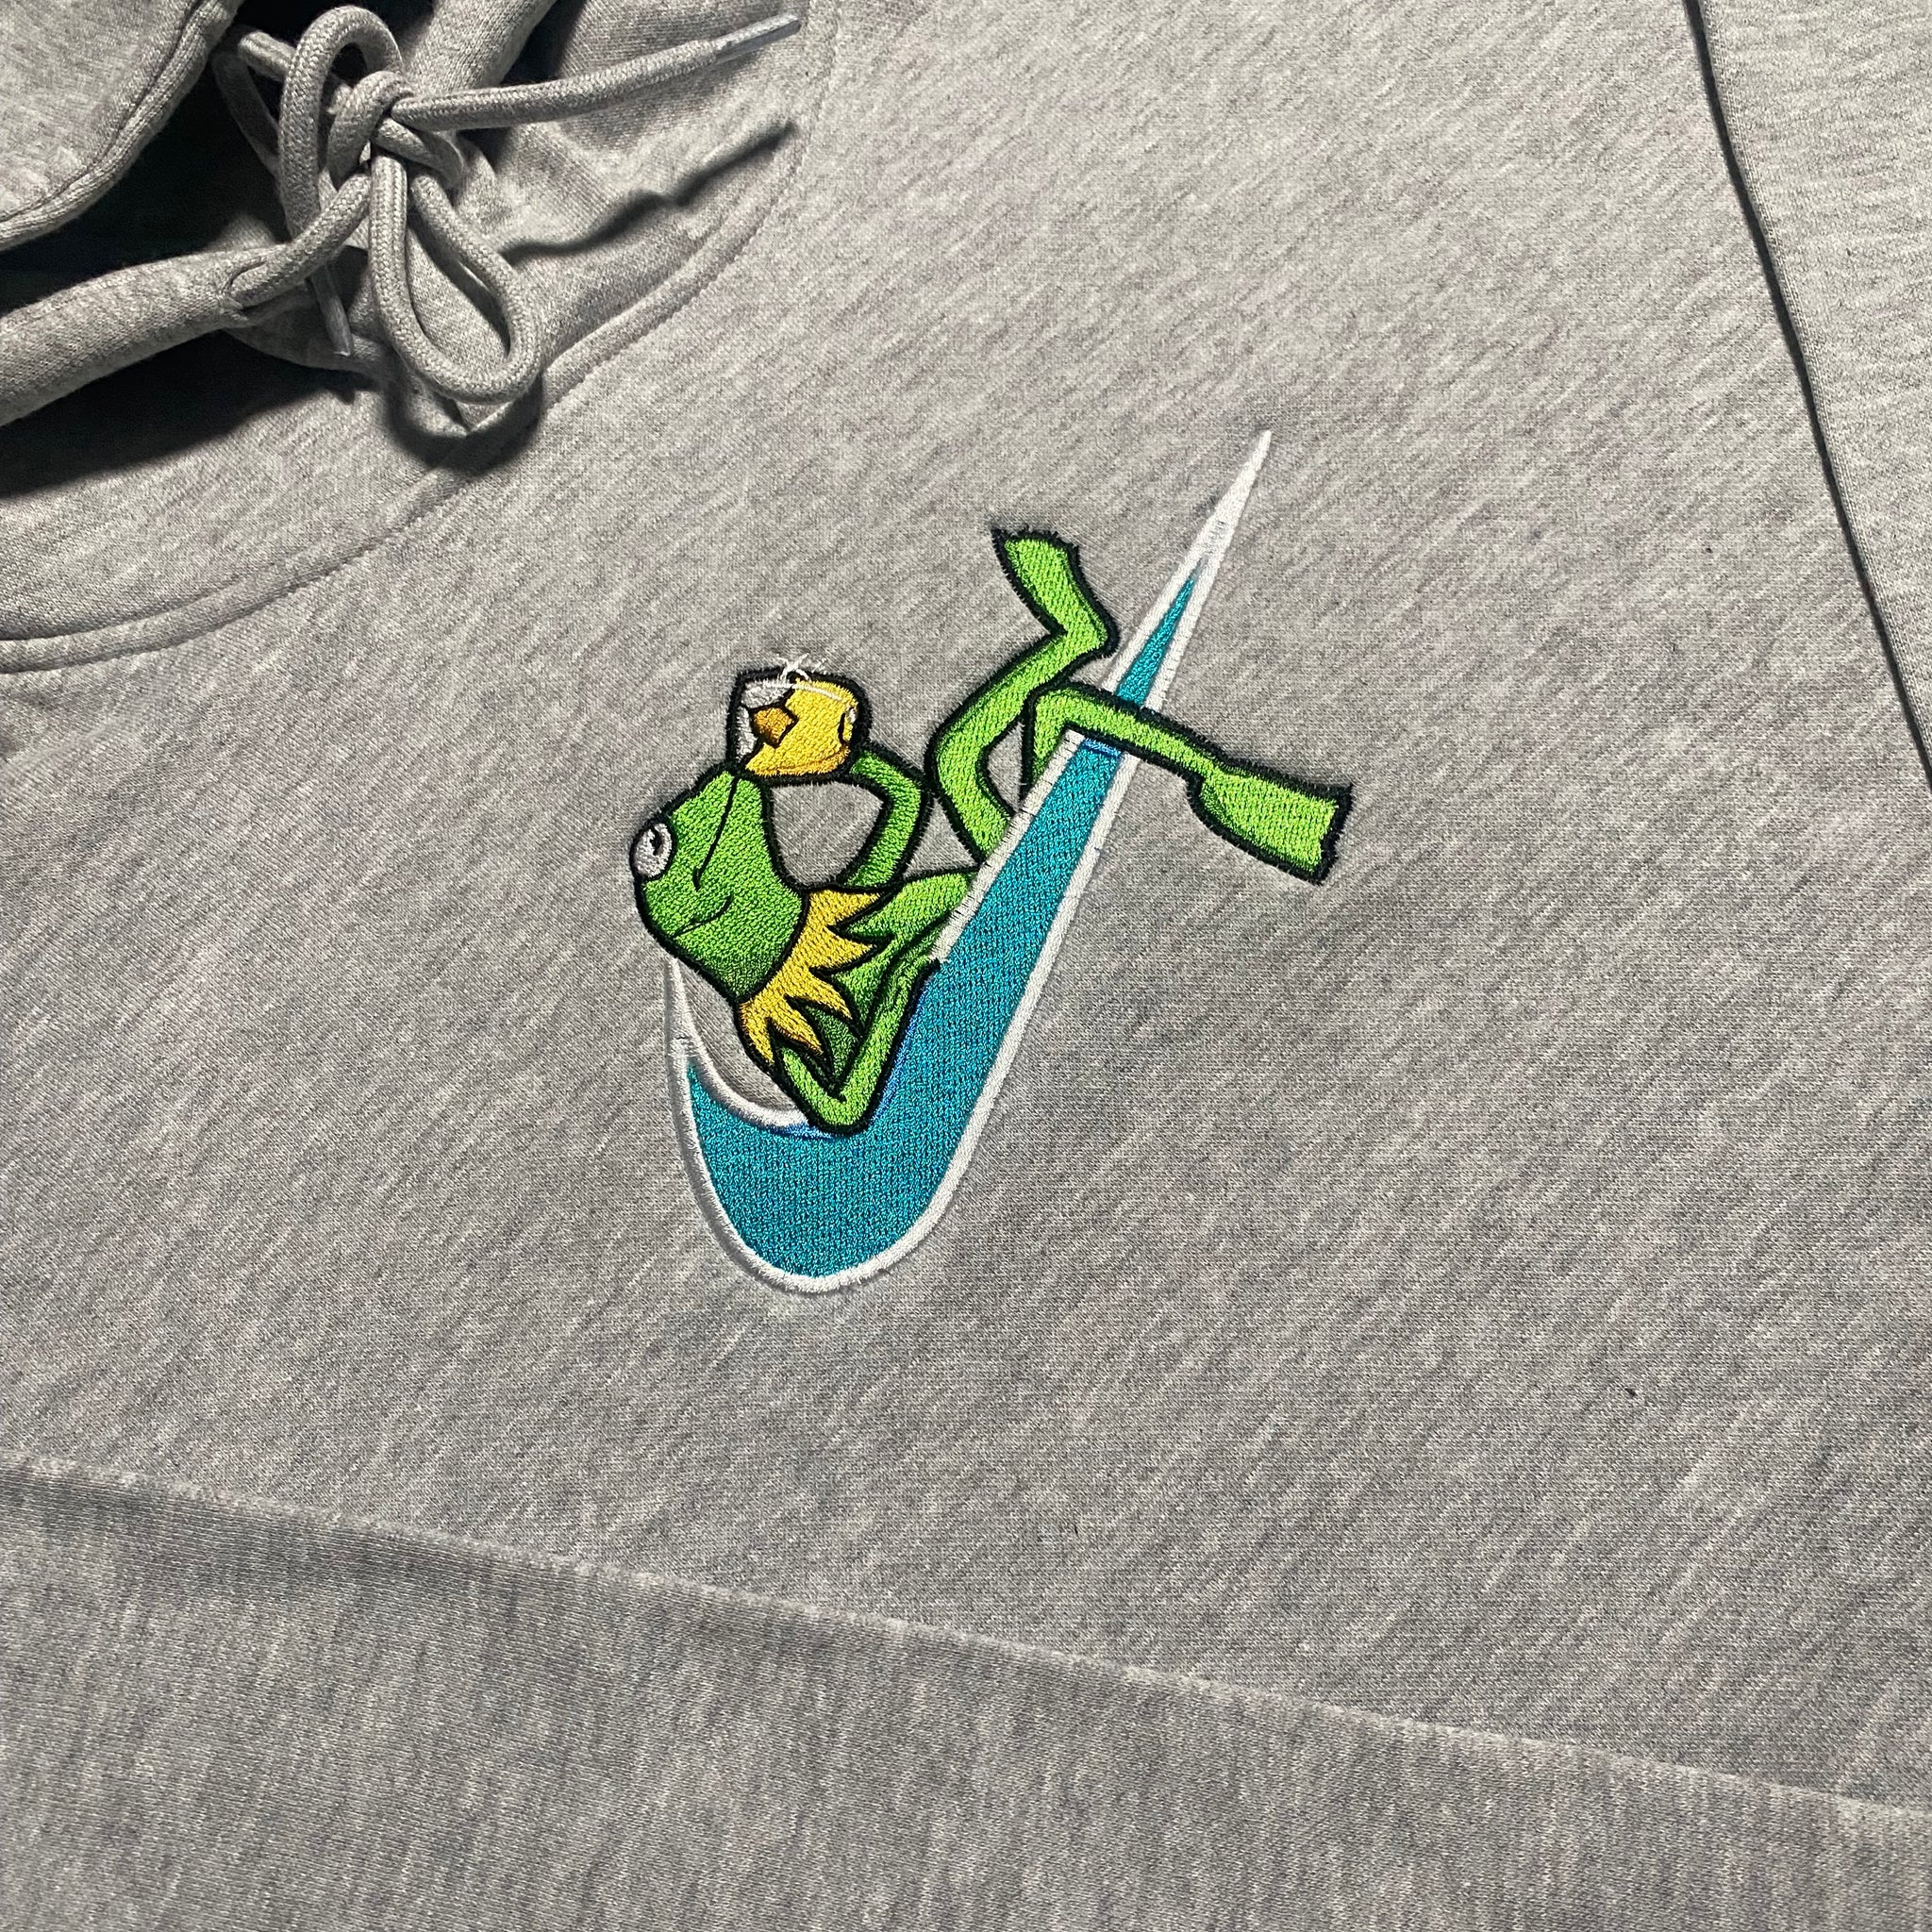 LIMITED Kermit the Frog X Minding My Business EMBROIDERED Gym HOODIE